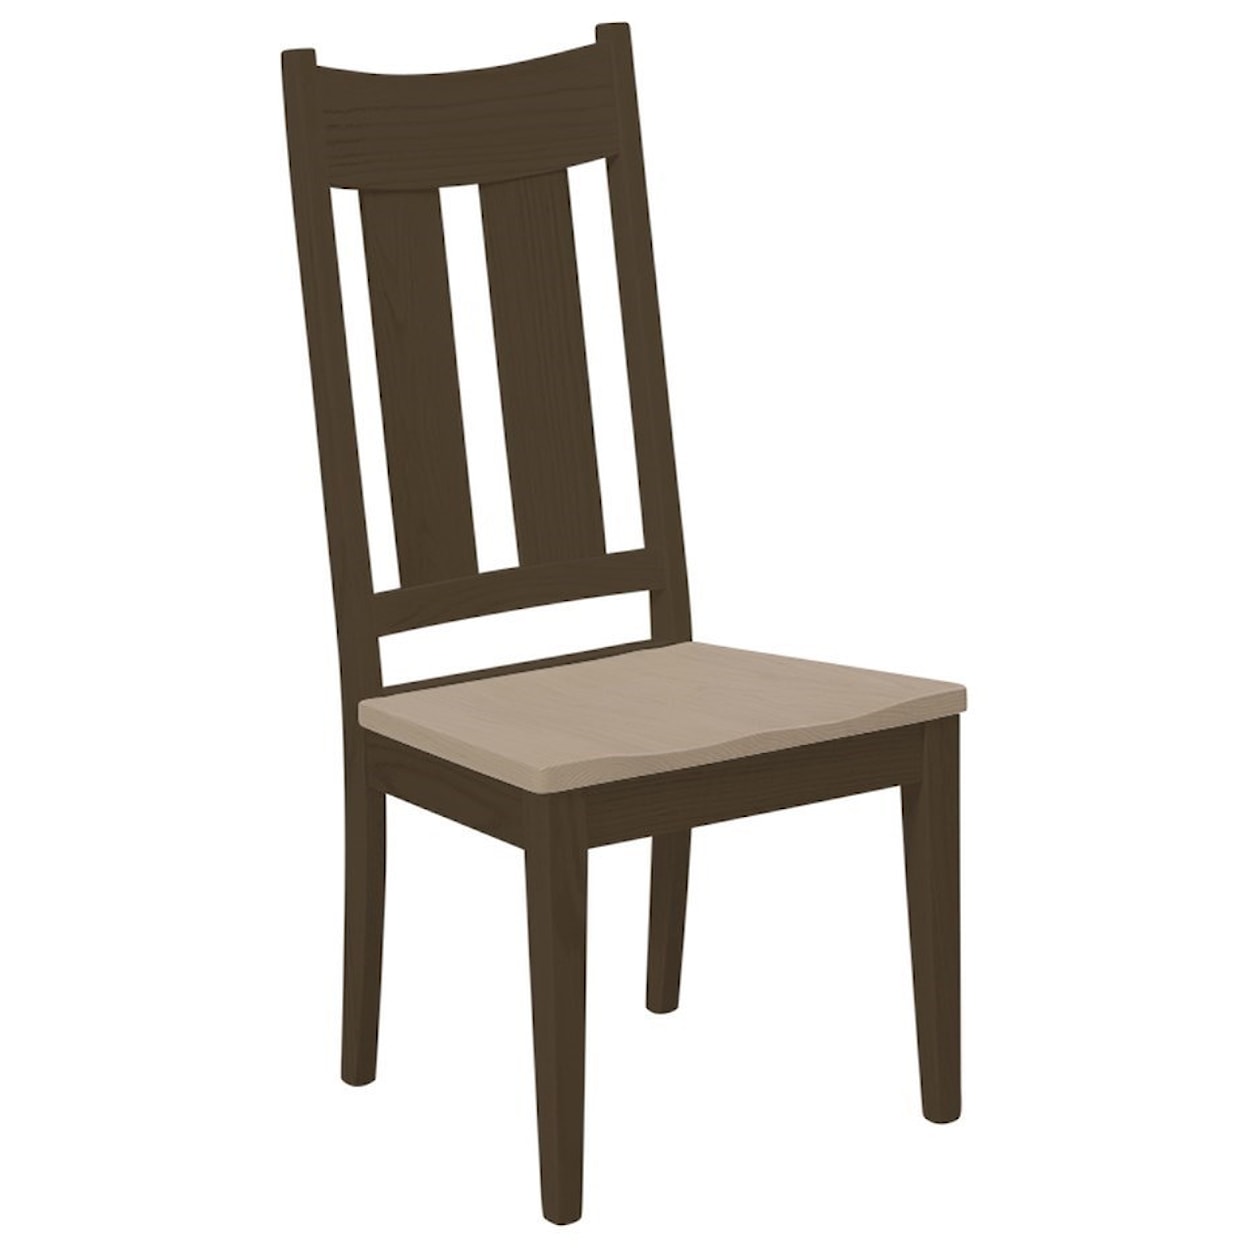 Daniels Amish Chairs and Barstools Tampa Side Chair